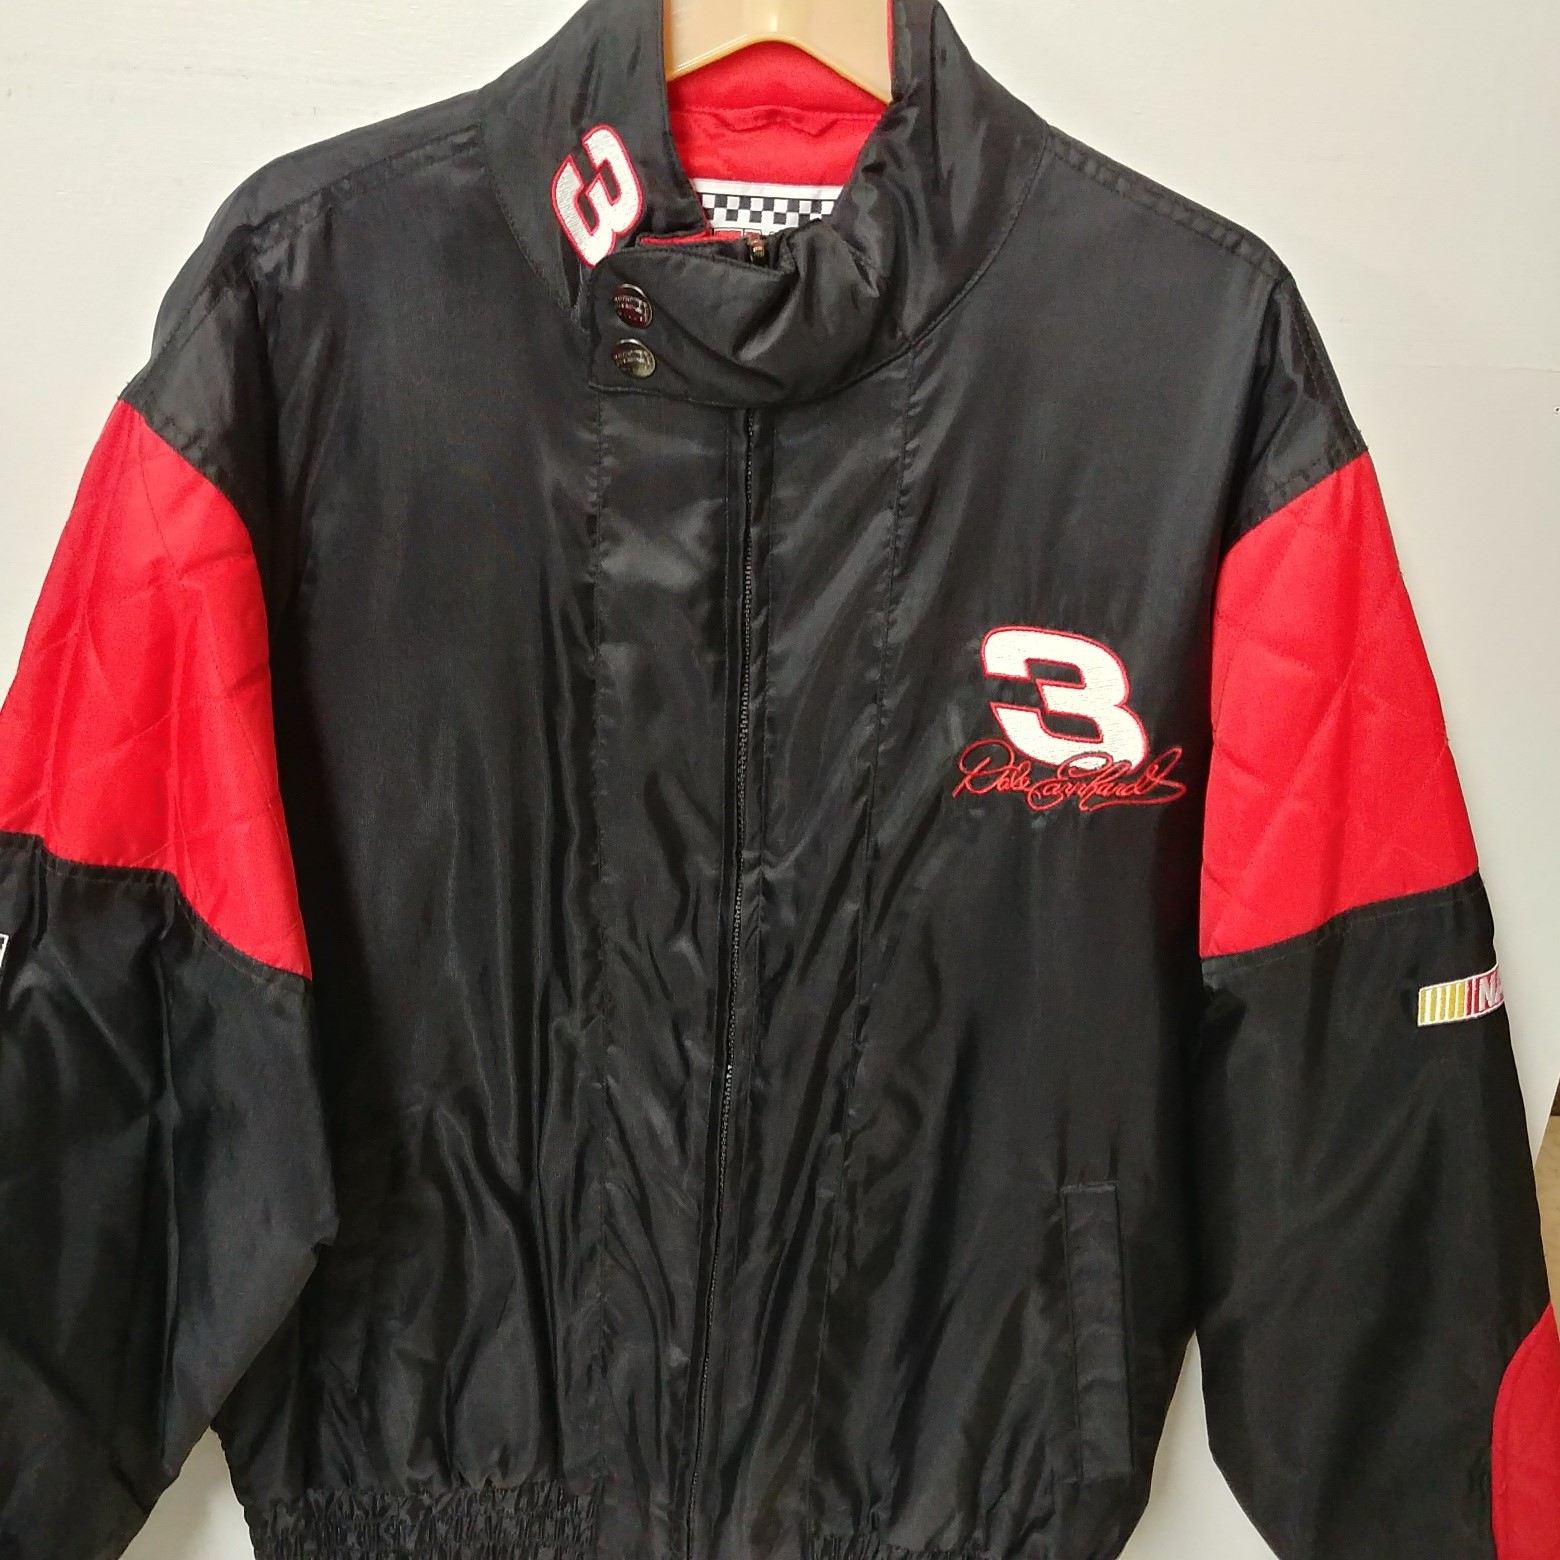 1999 Dale Earnhardt "Intimidator""7 Time Champion" heavy weight jacket